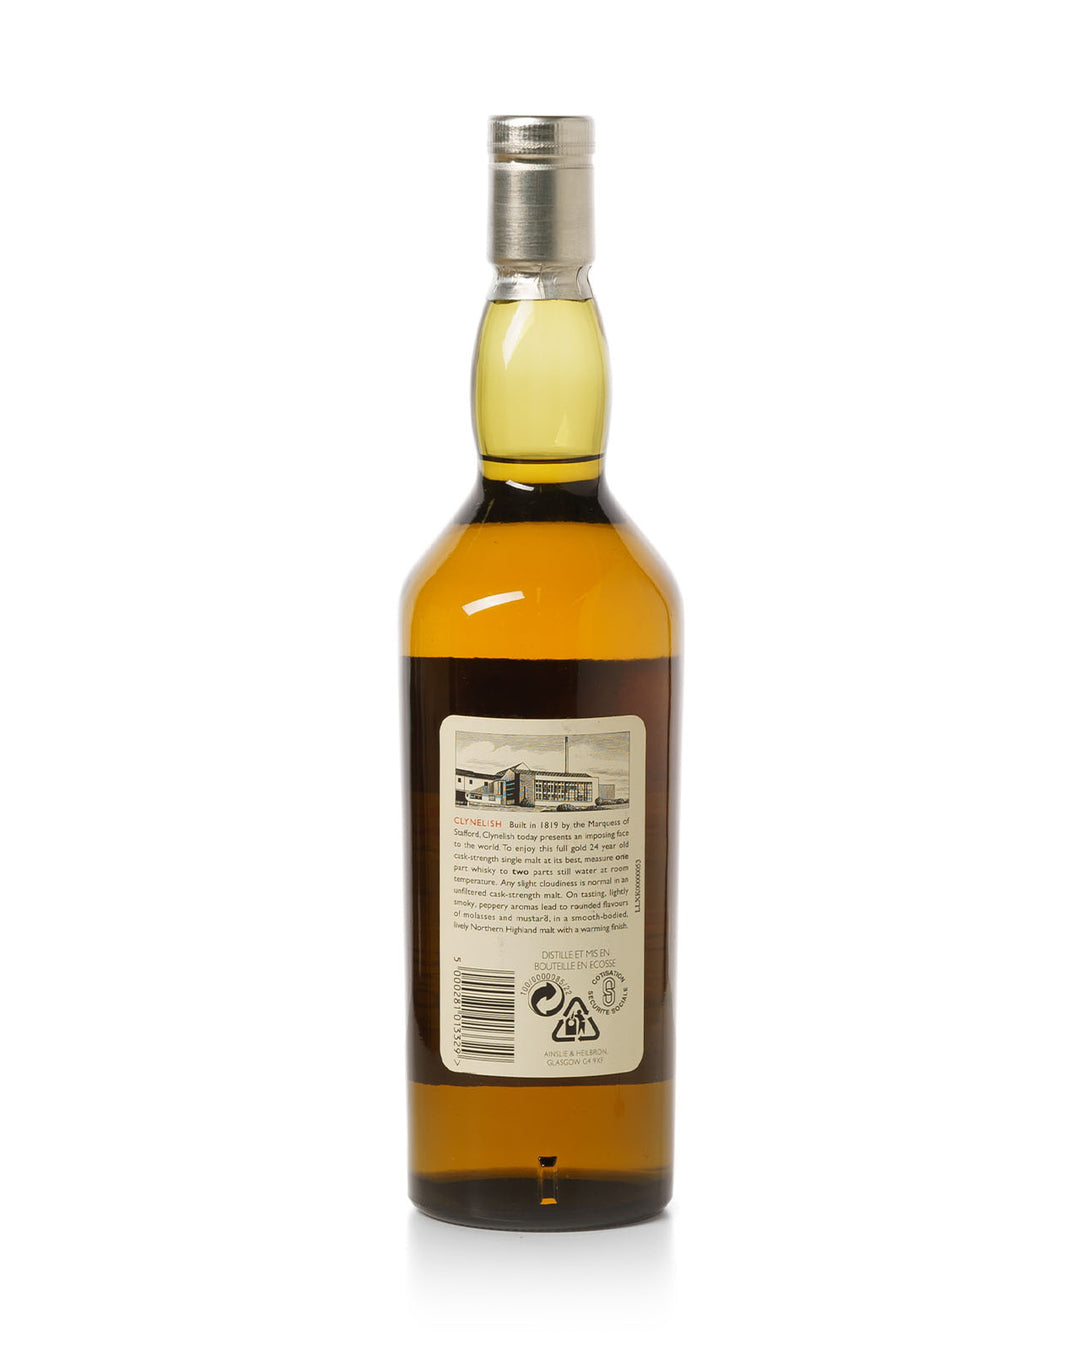 Clynelish 1972 24 Year Old Rare Malts Selection Bottled 1997 61.3% ABV With Original Box